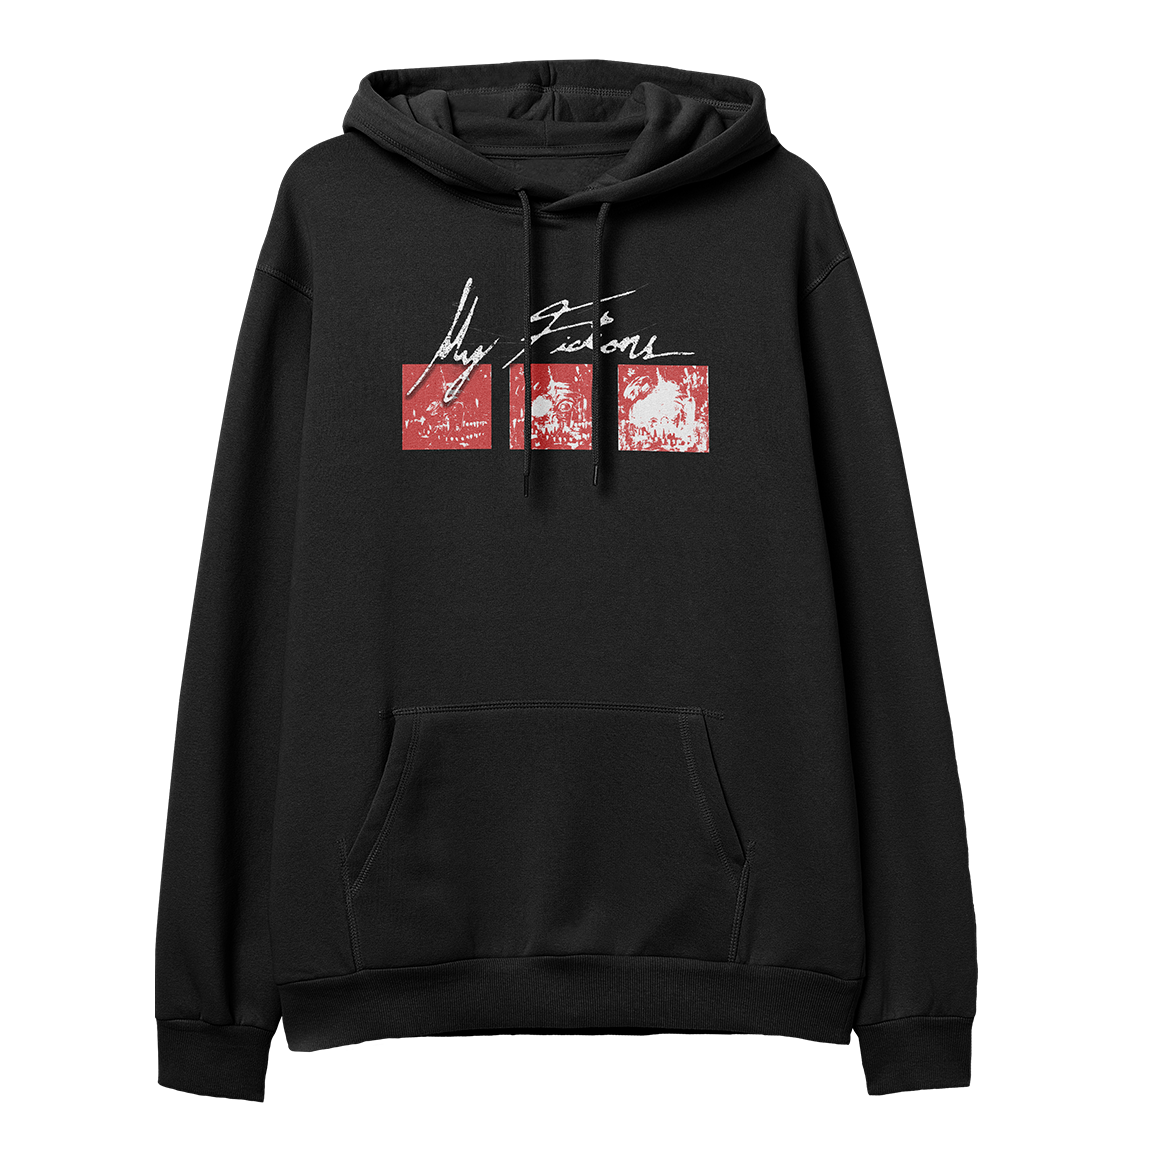 My Fictions - Decay Hoodie